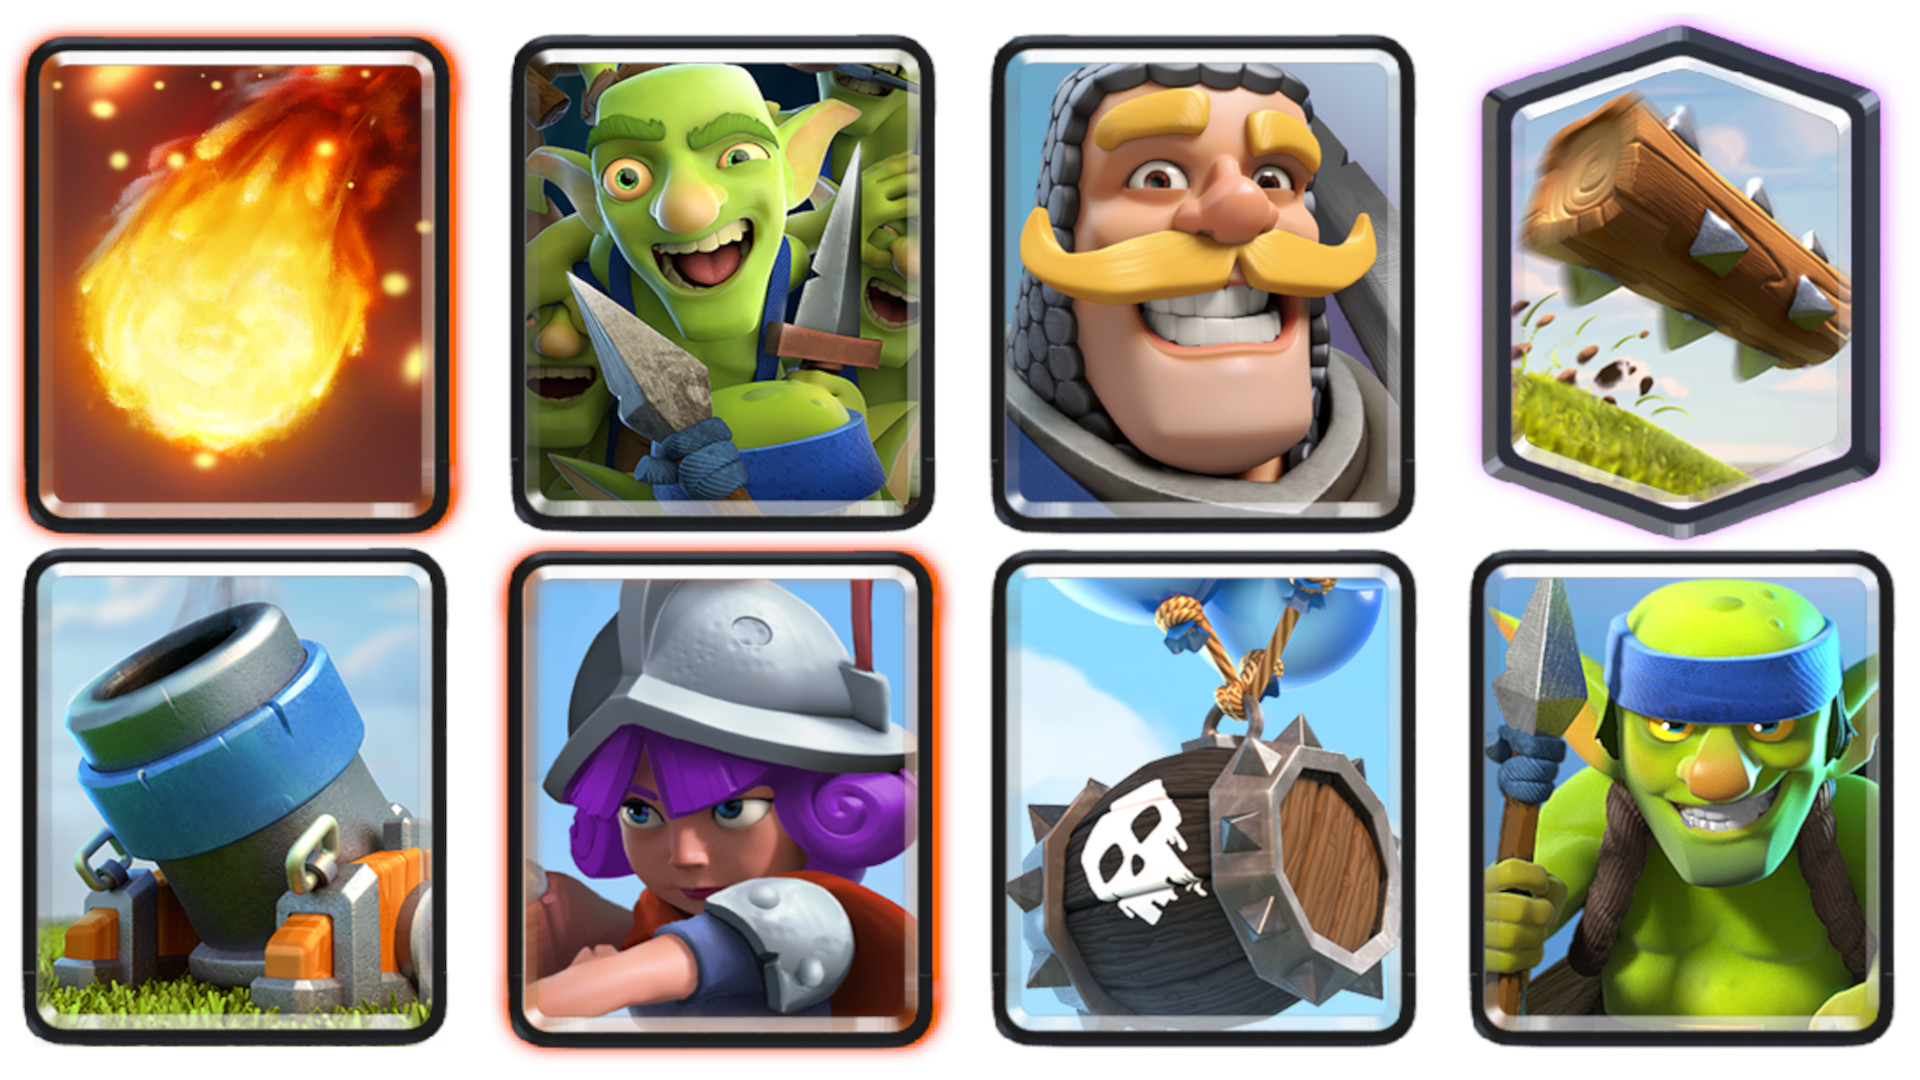 State of the Clash Royale Meta - Popular Cards and Decks on the